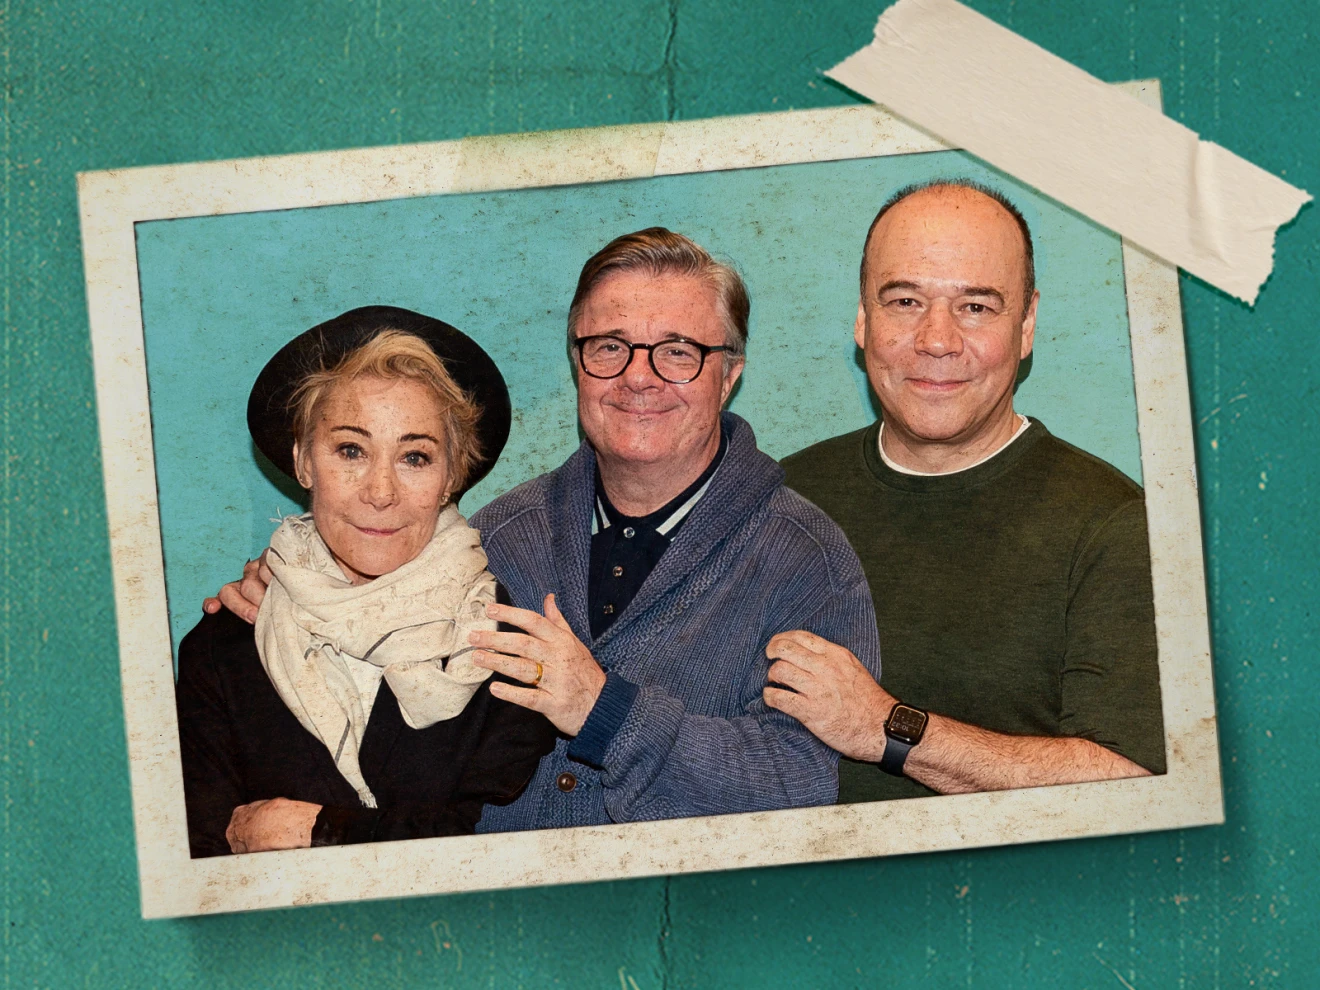 Pictures from Home on Broadway Starring Nathan Lane